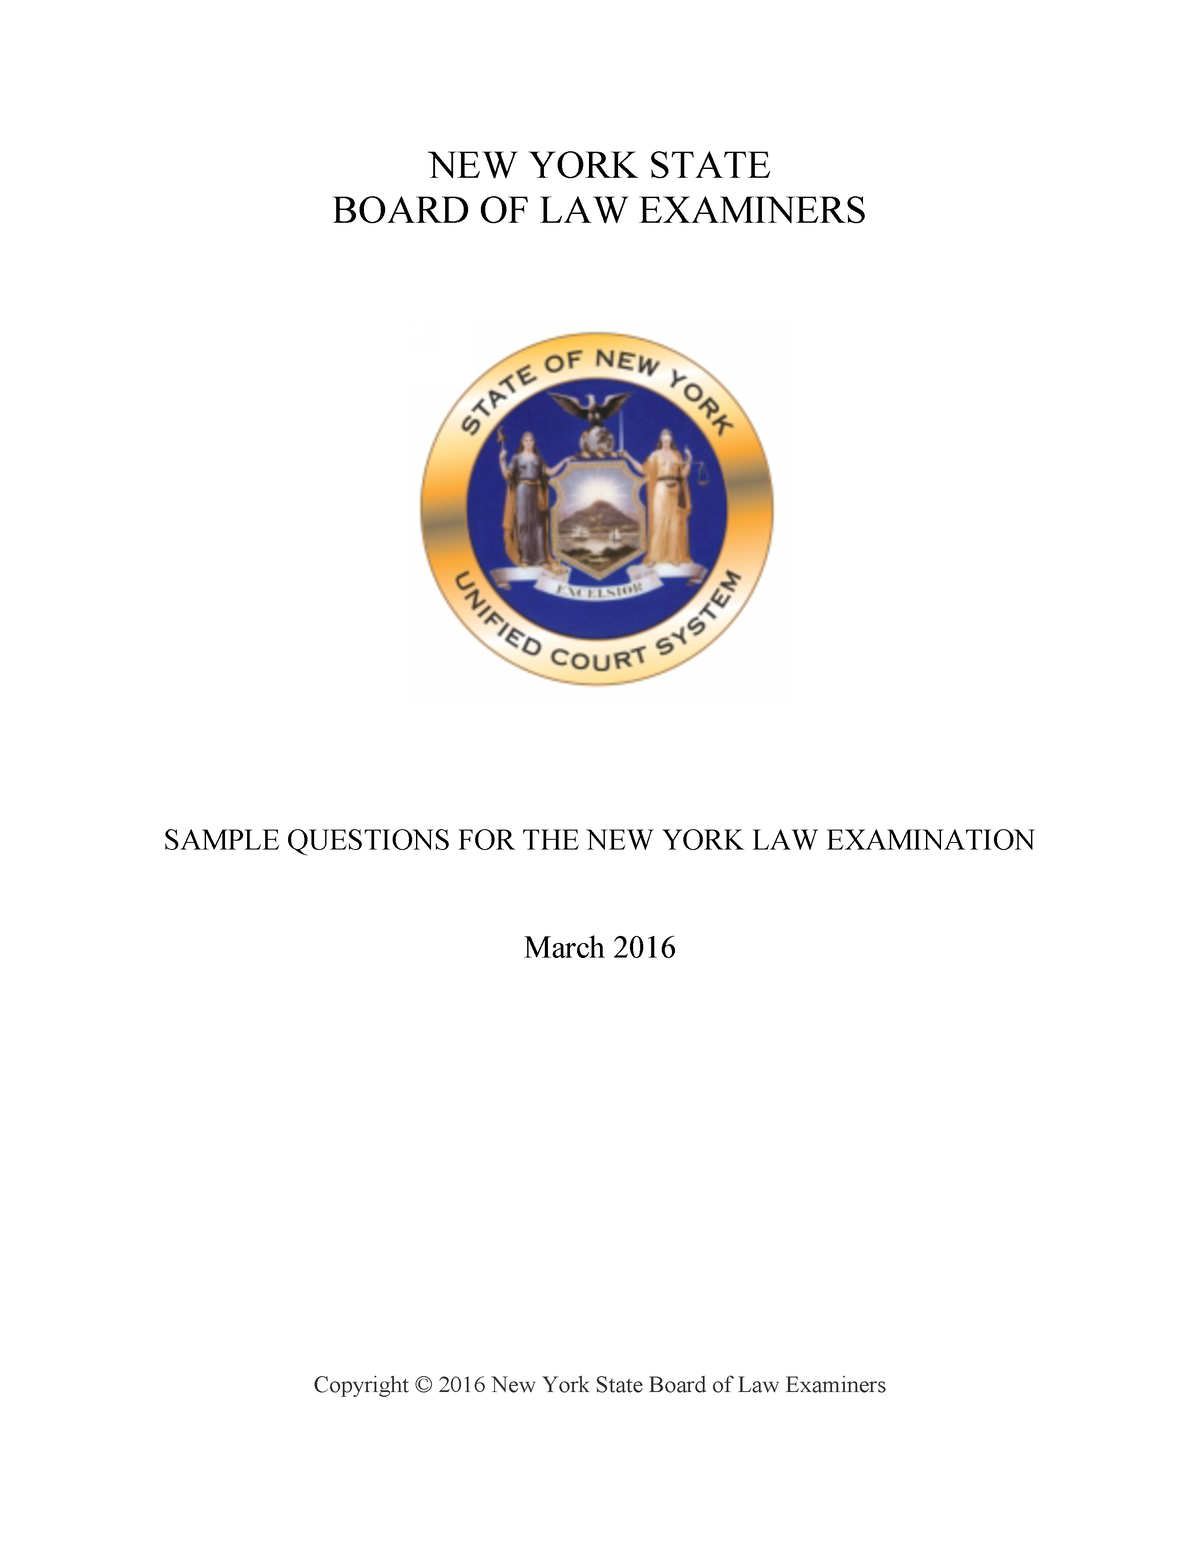 NYLE sample Questions in NY Bar review - NEW YORK STATE BOARD OF LAW  EXAMINERS SAMPLE QUESTIONS FOR - Studocu